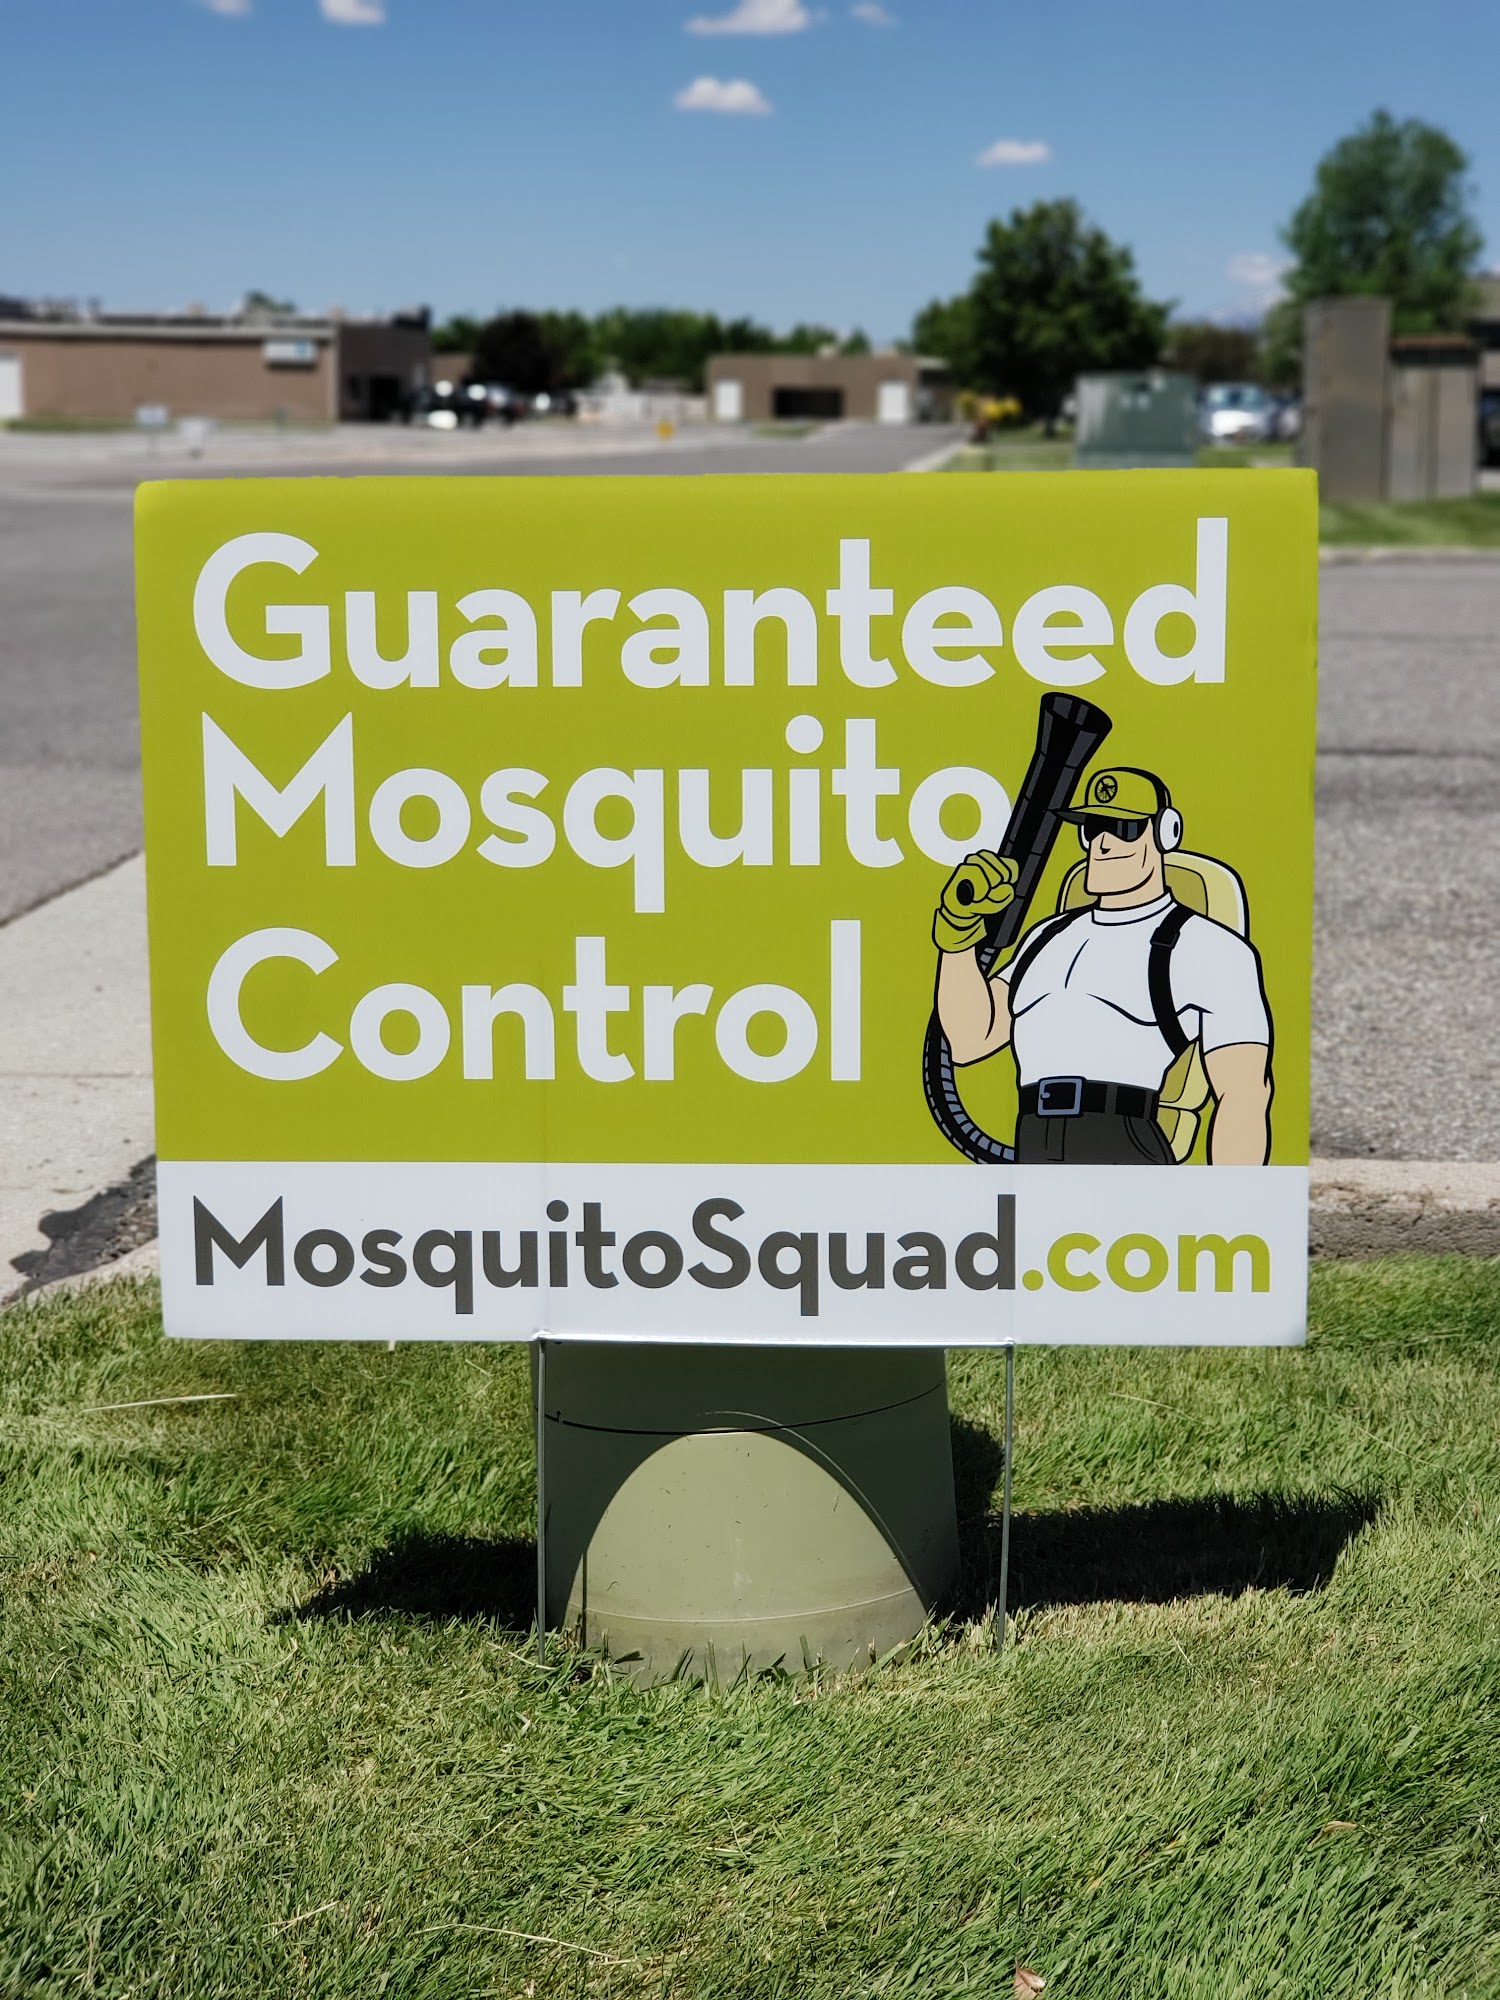 Mosquito Squad of Greater Salt Lake City